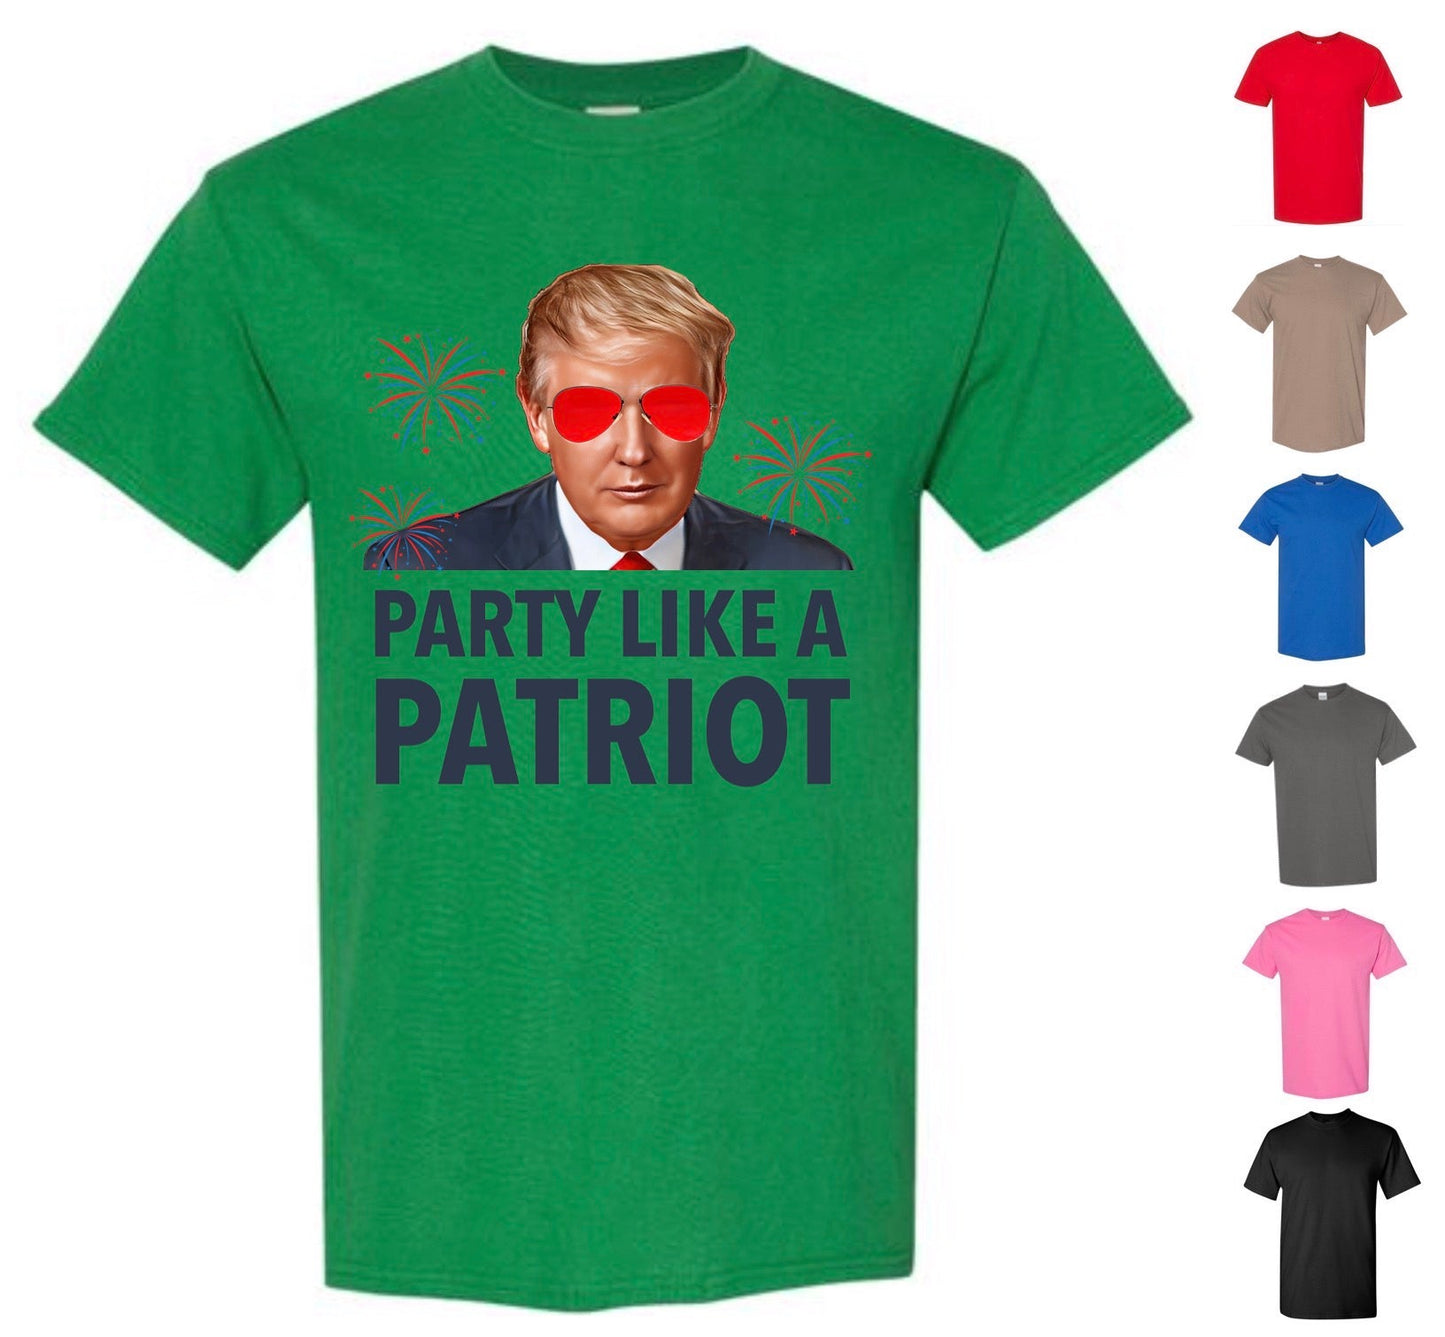 Party Like A Patriot Trump T-Shirt, 4th of July (Free Shipping!)